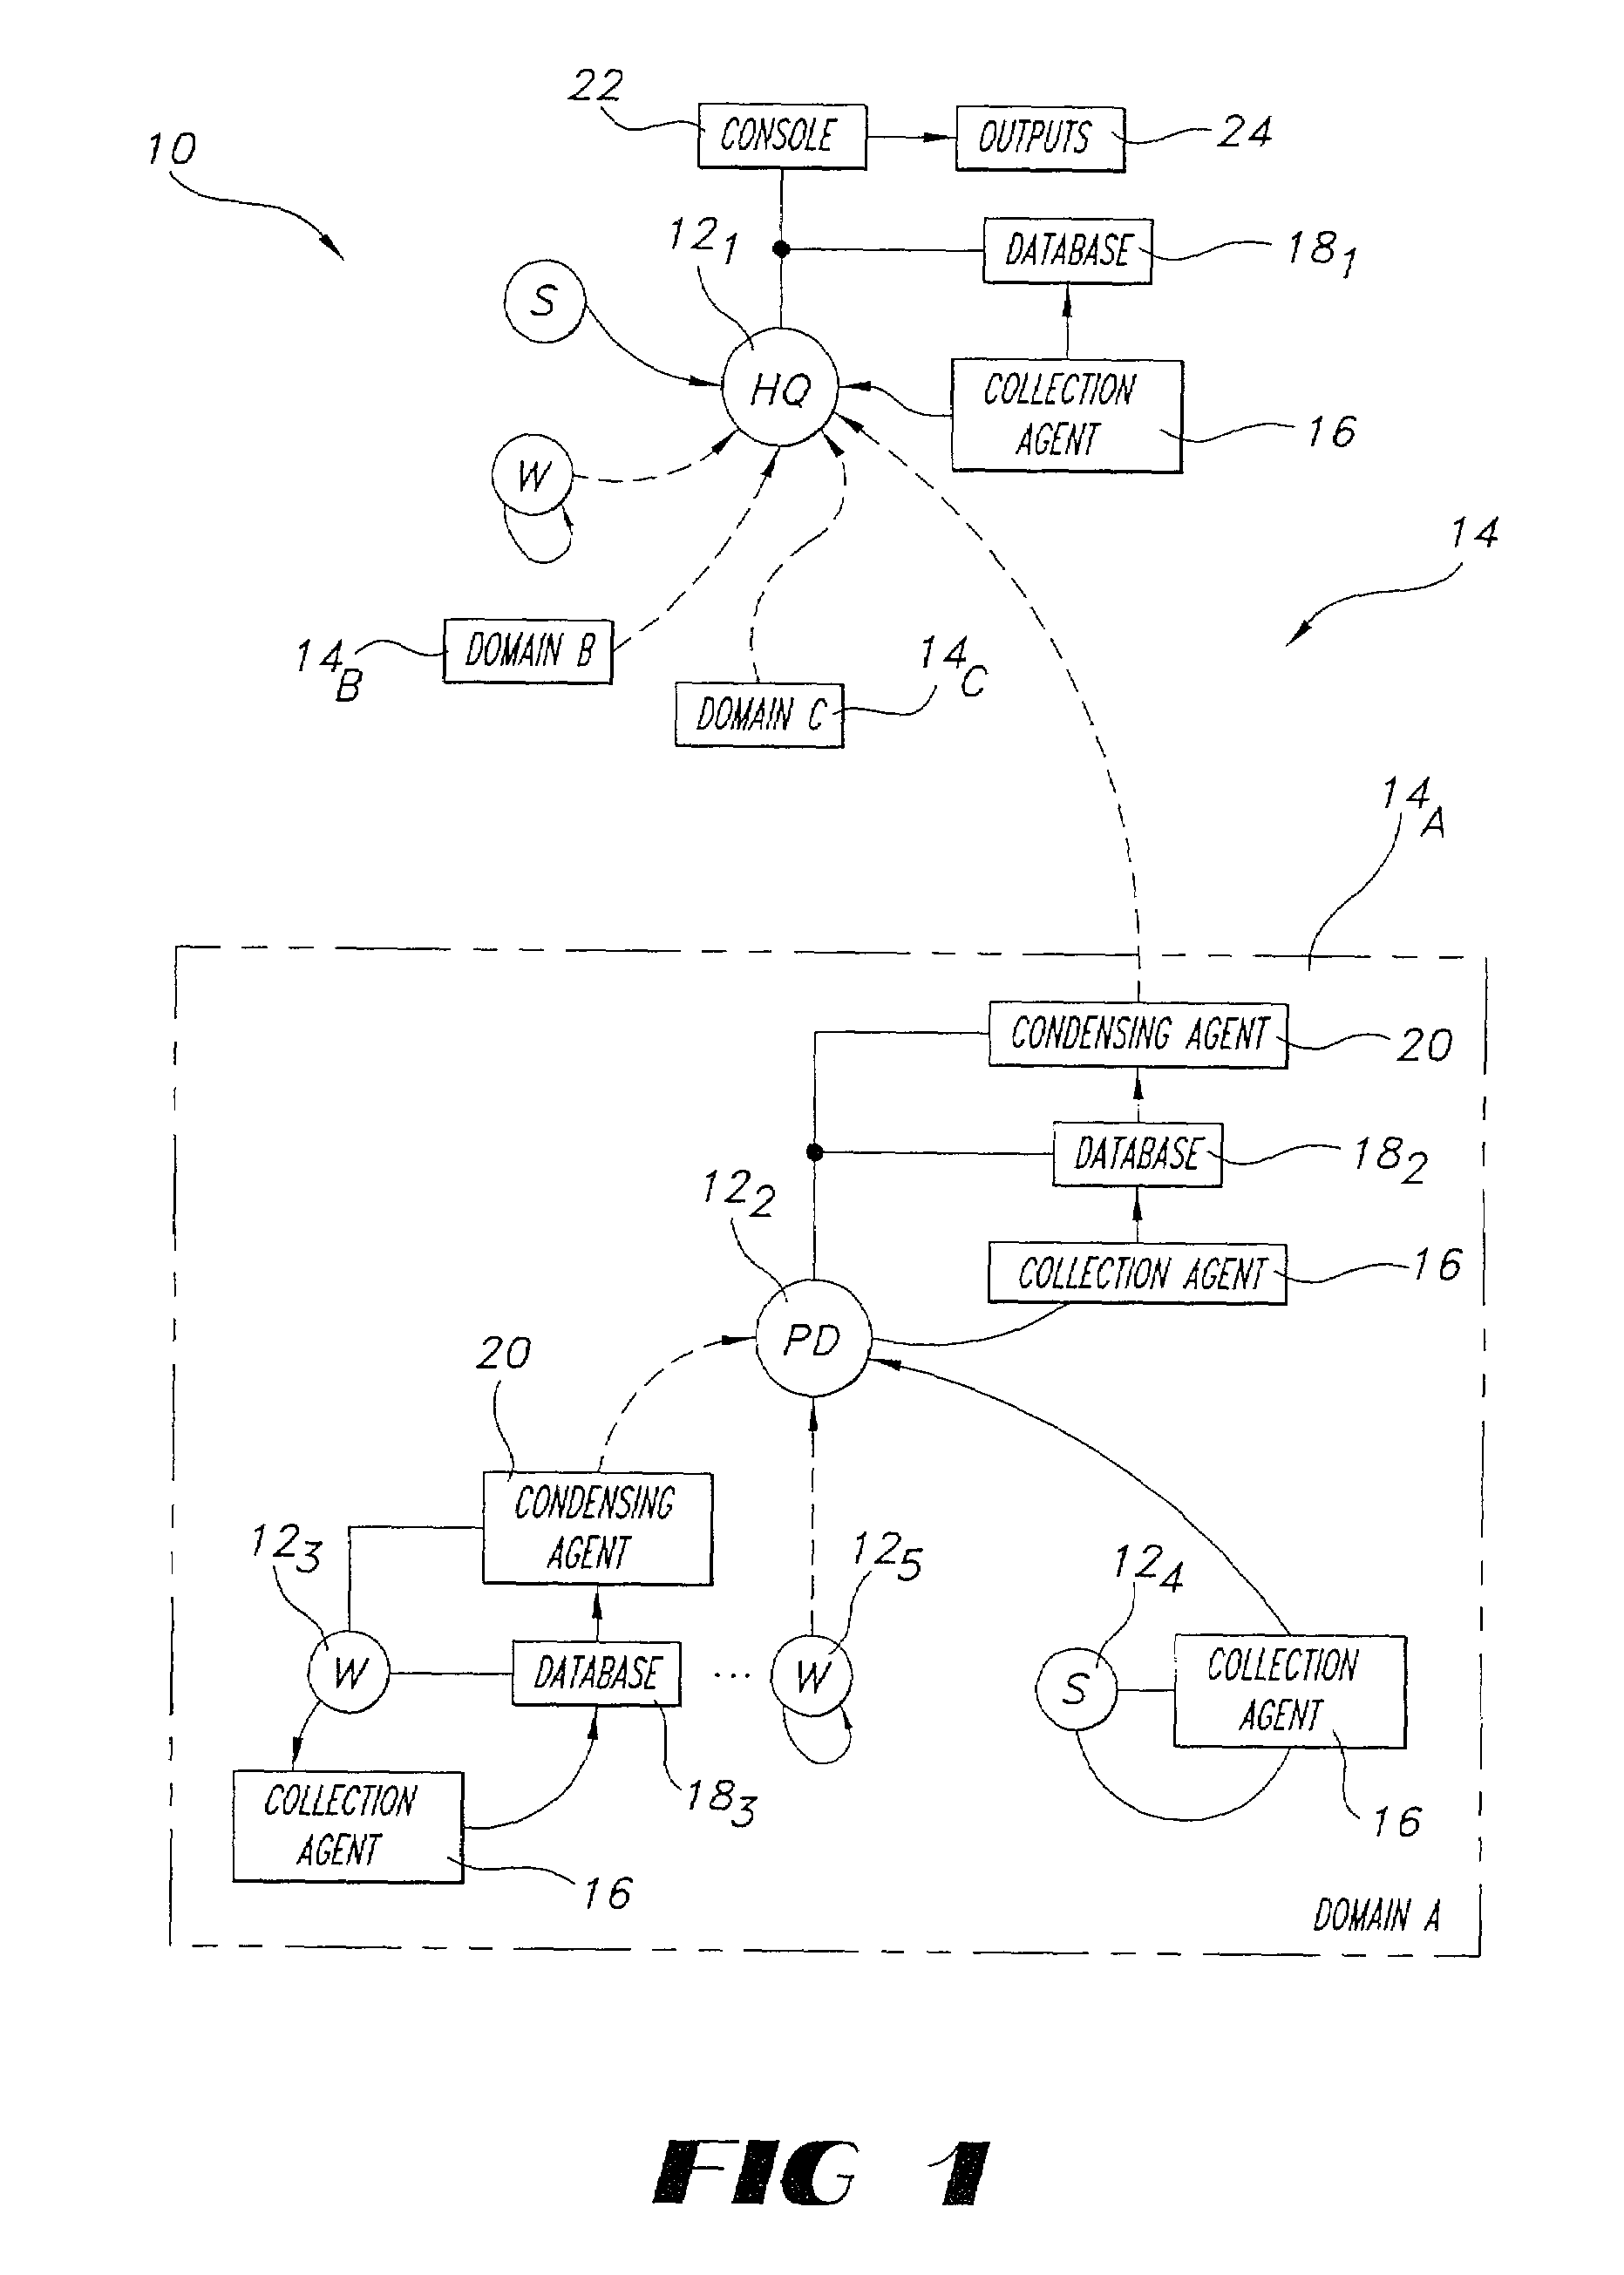 System and method for managing information for a plurality of computer systems in a distributed network